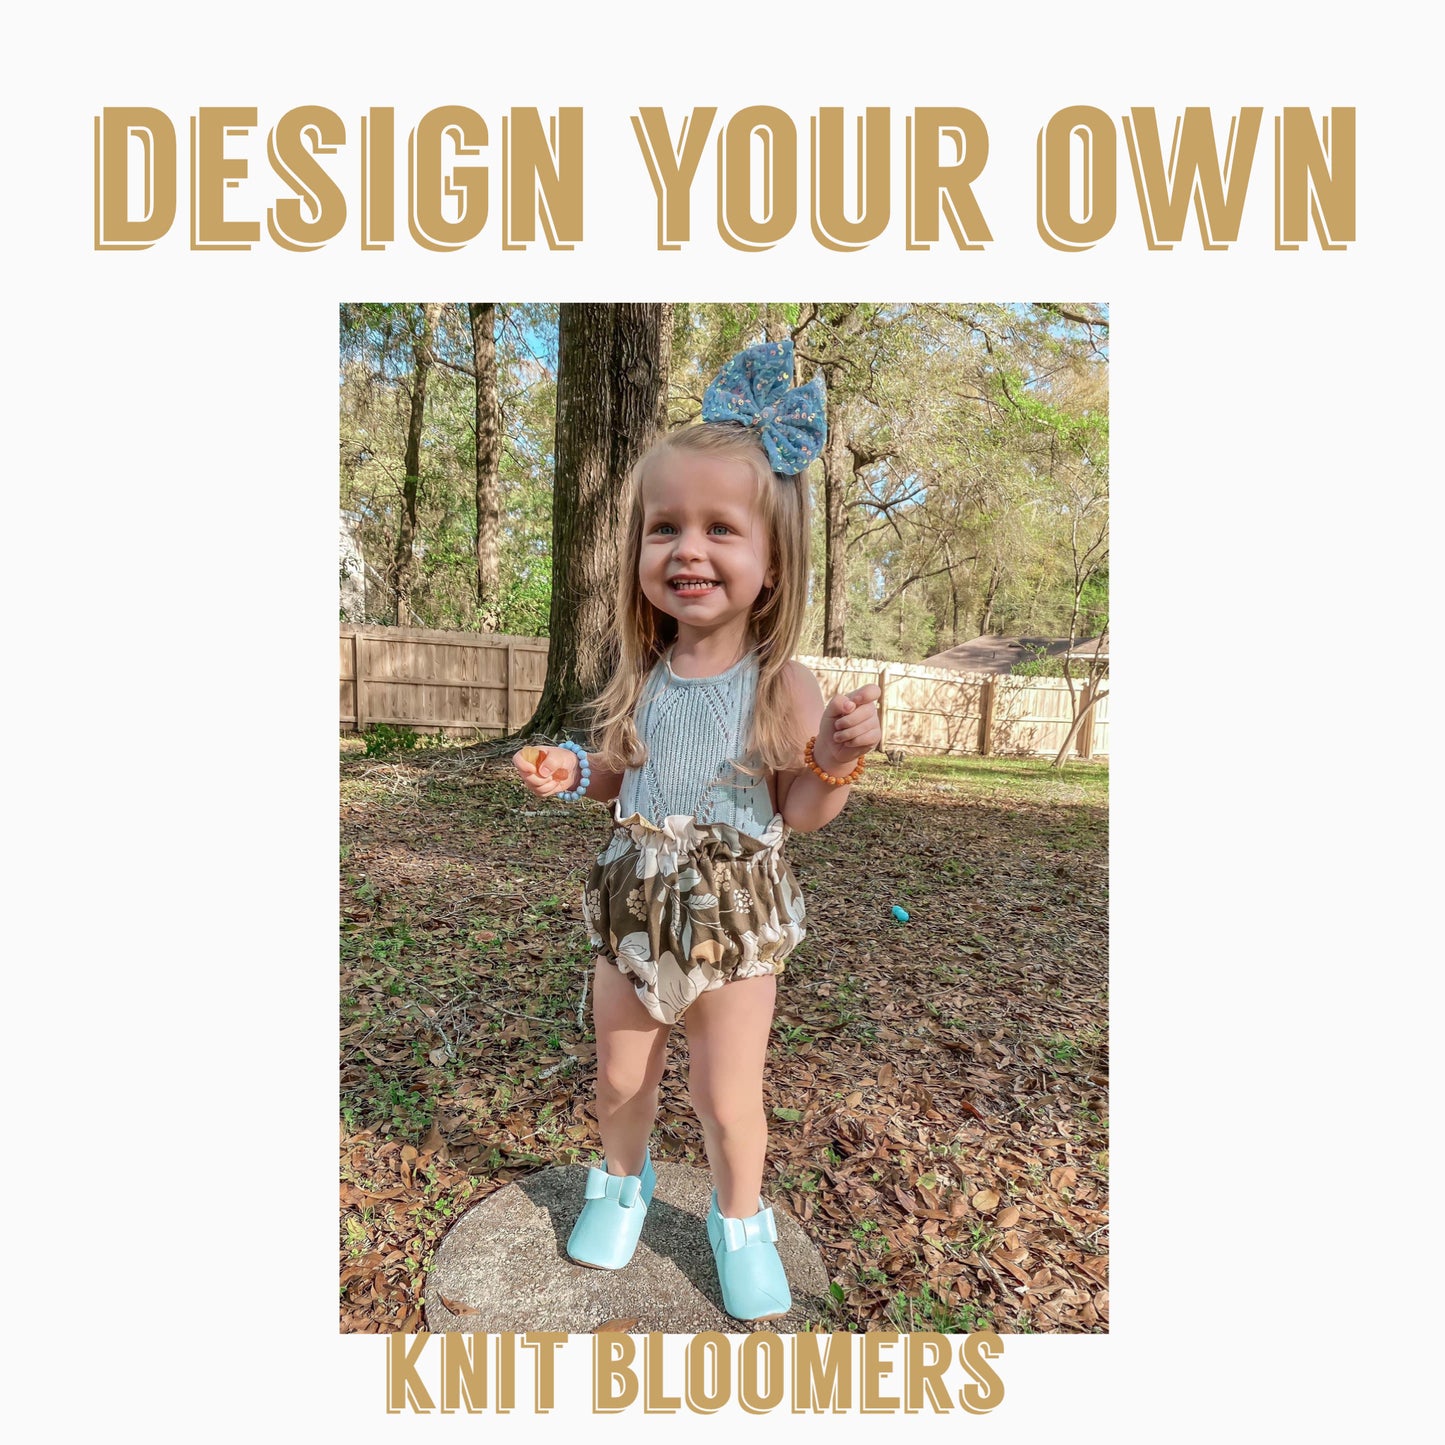 Design your own | Knit Bloomers